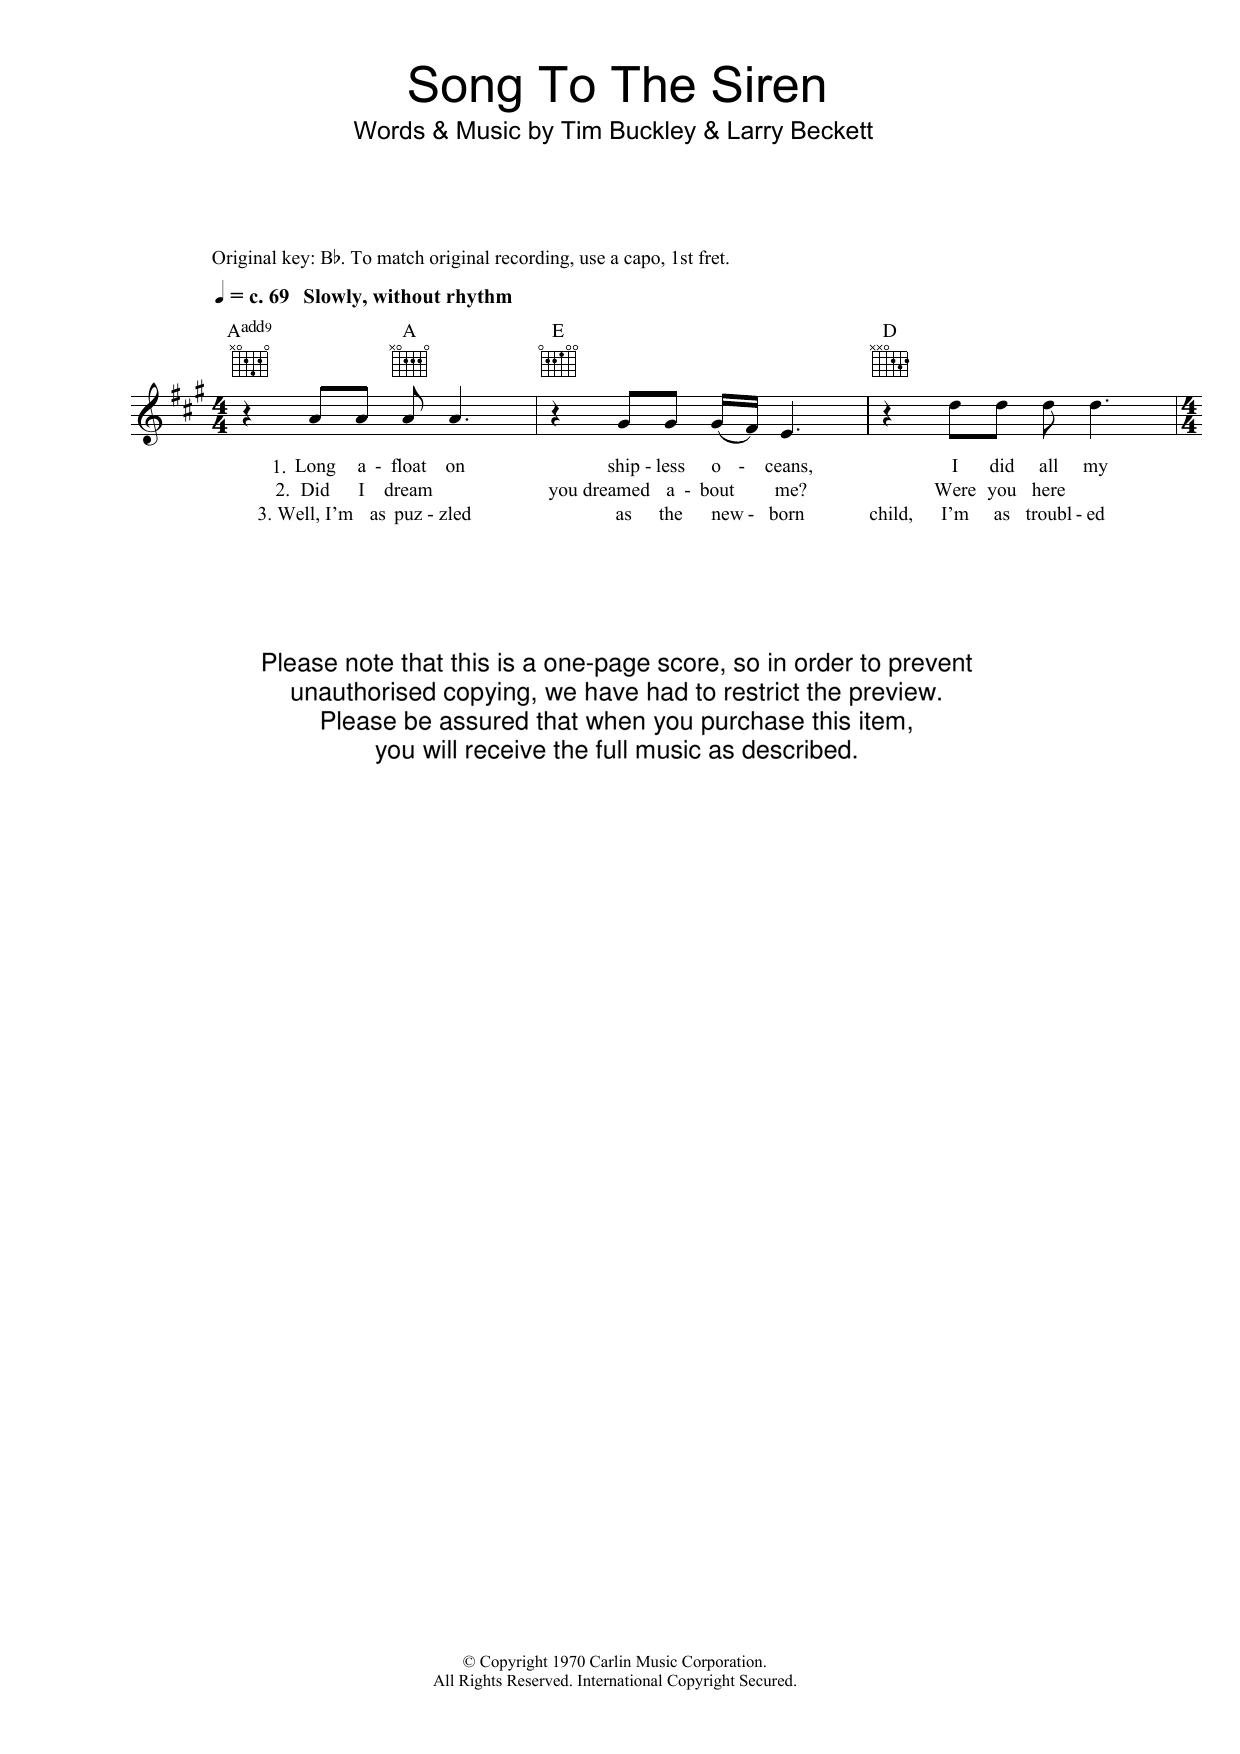 Download Tim Buckley Song To The Siren Sheet Music